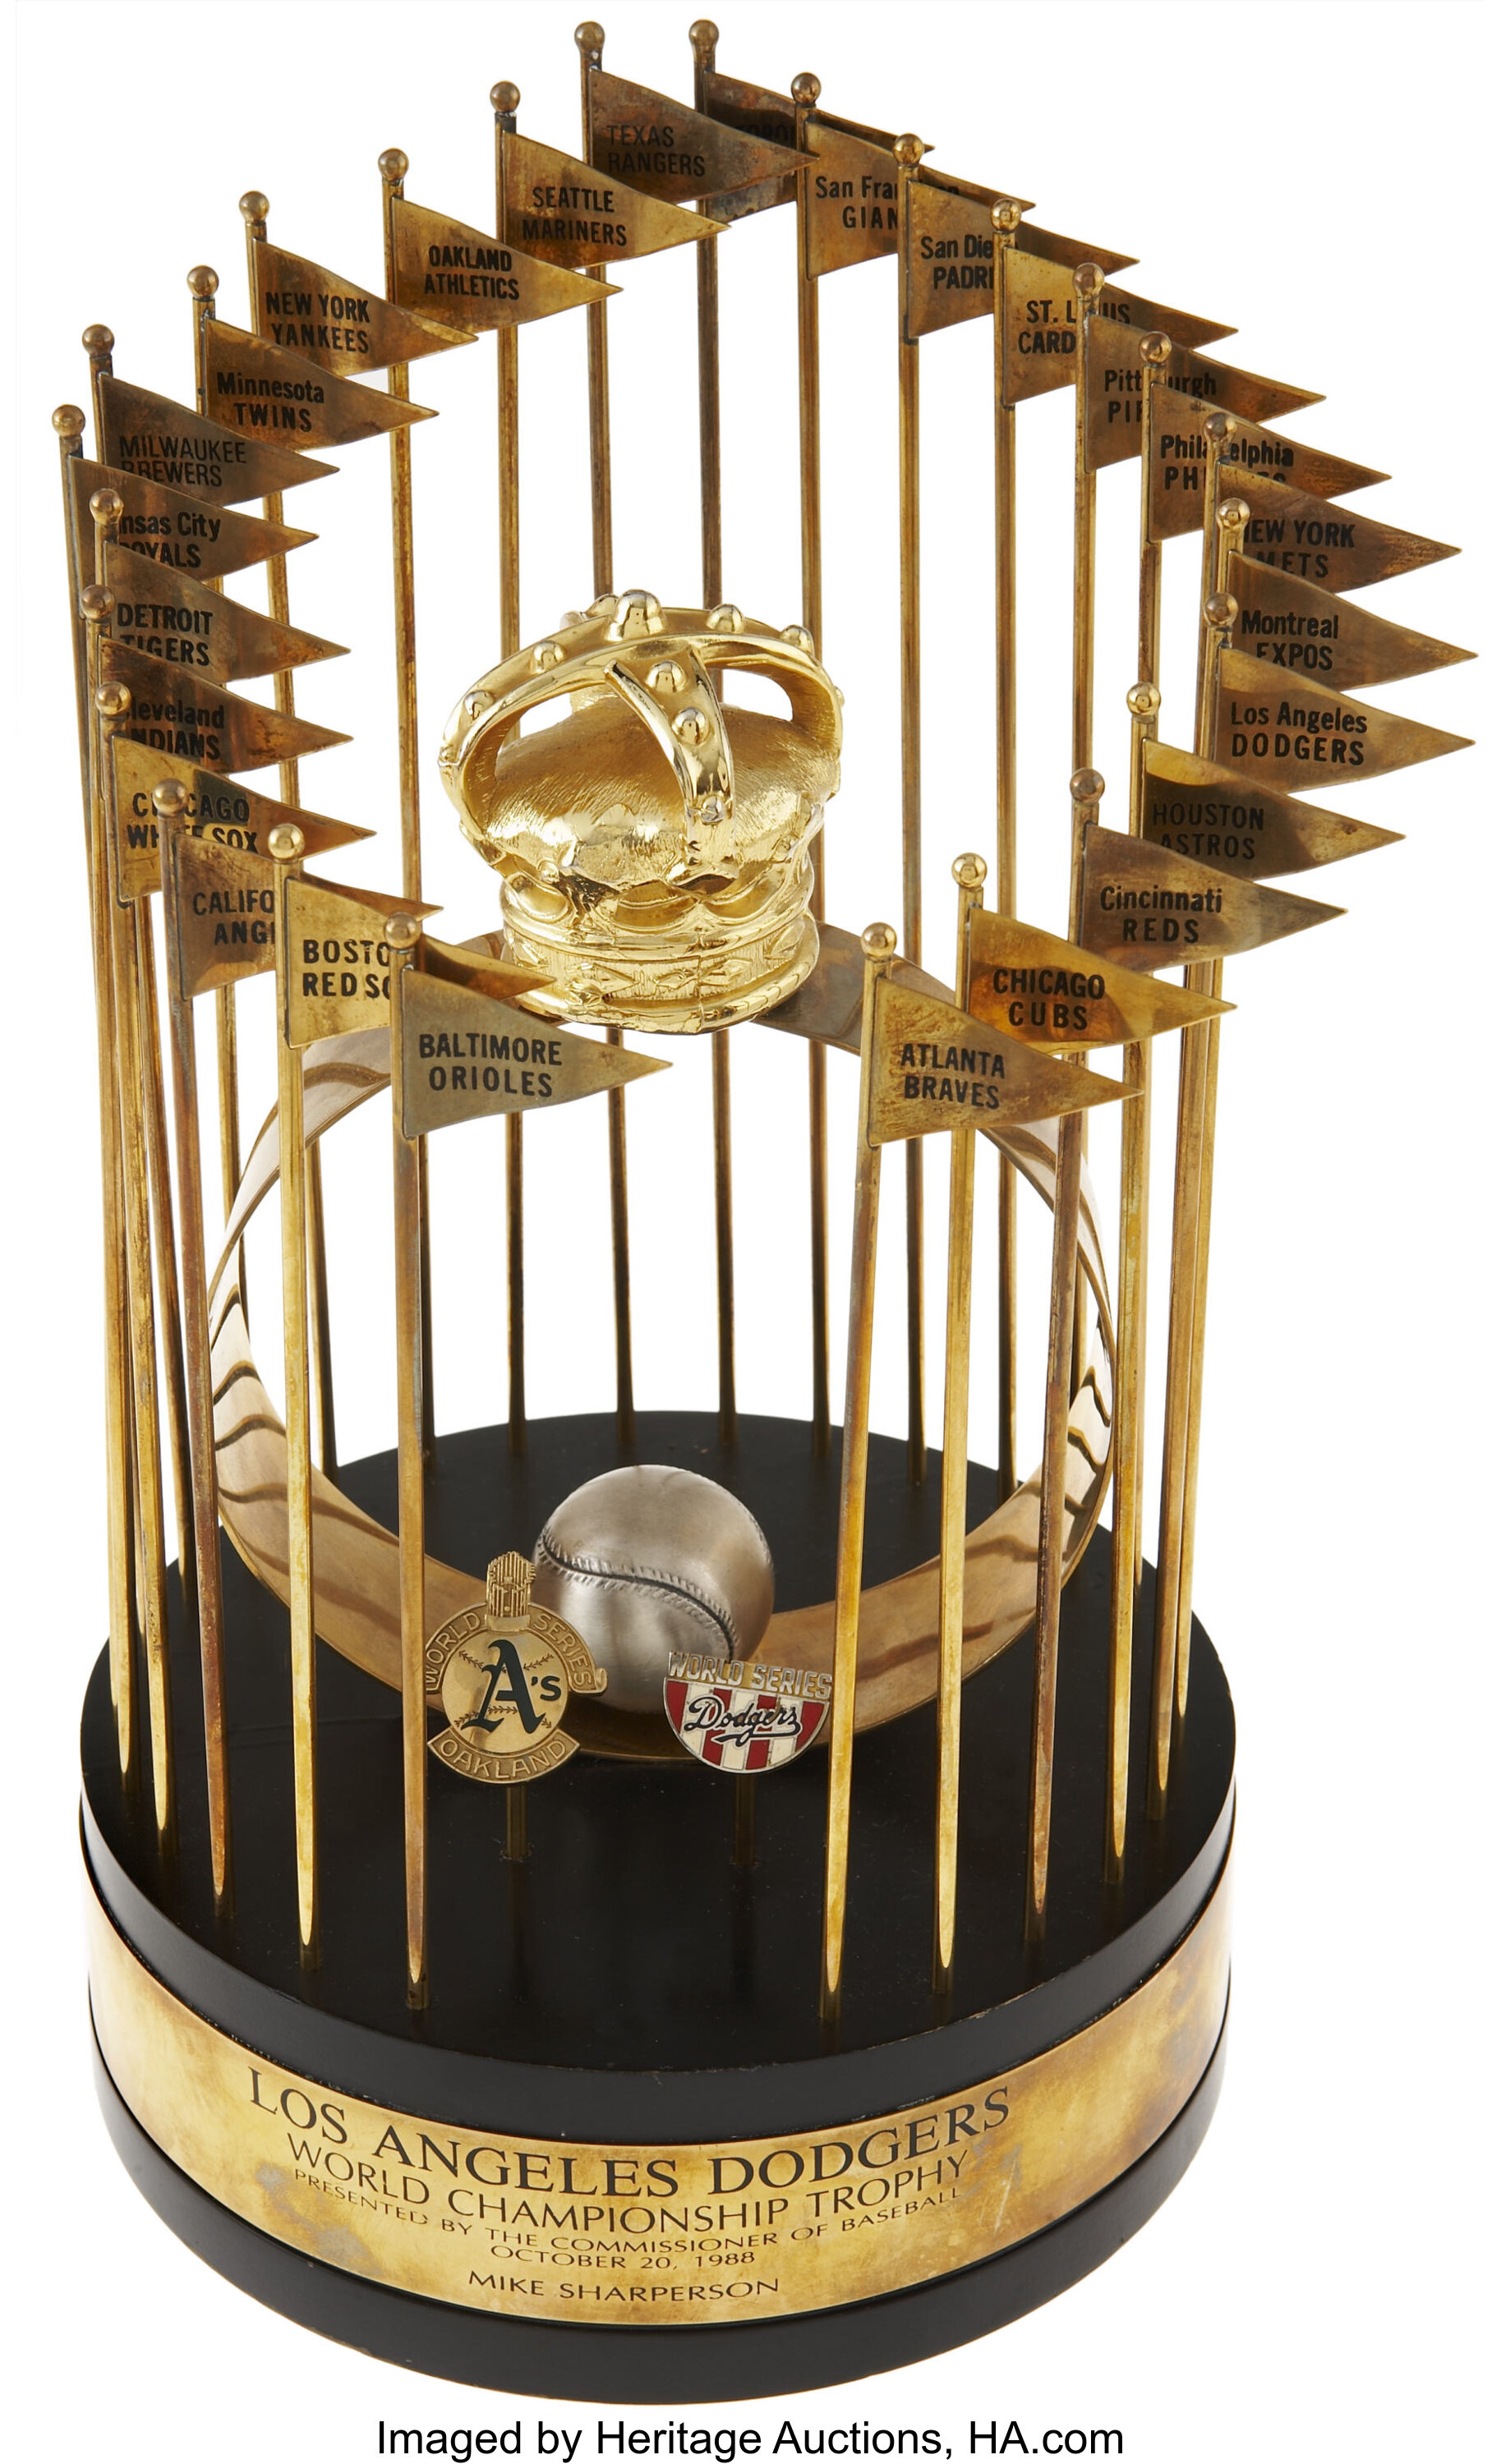 1988 Los Angeles Dodgers World Championship Trophy Presented to, Lot  #19826